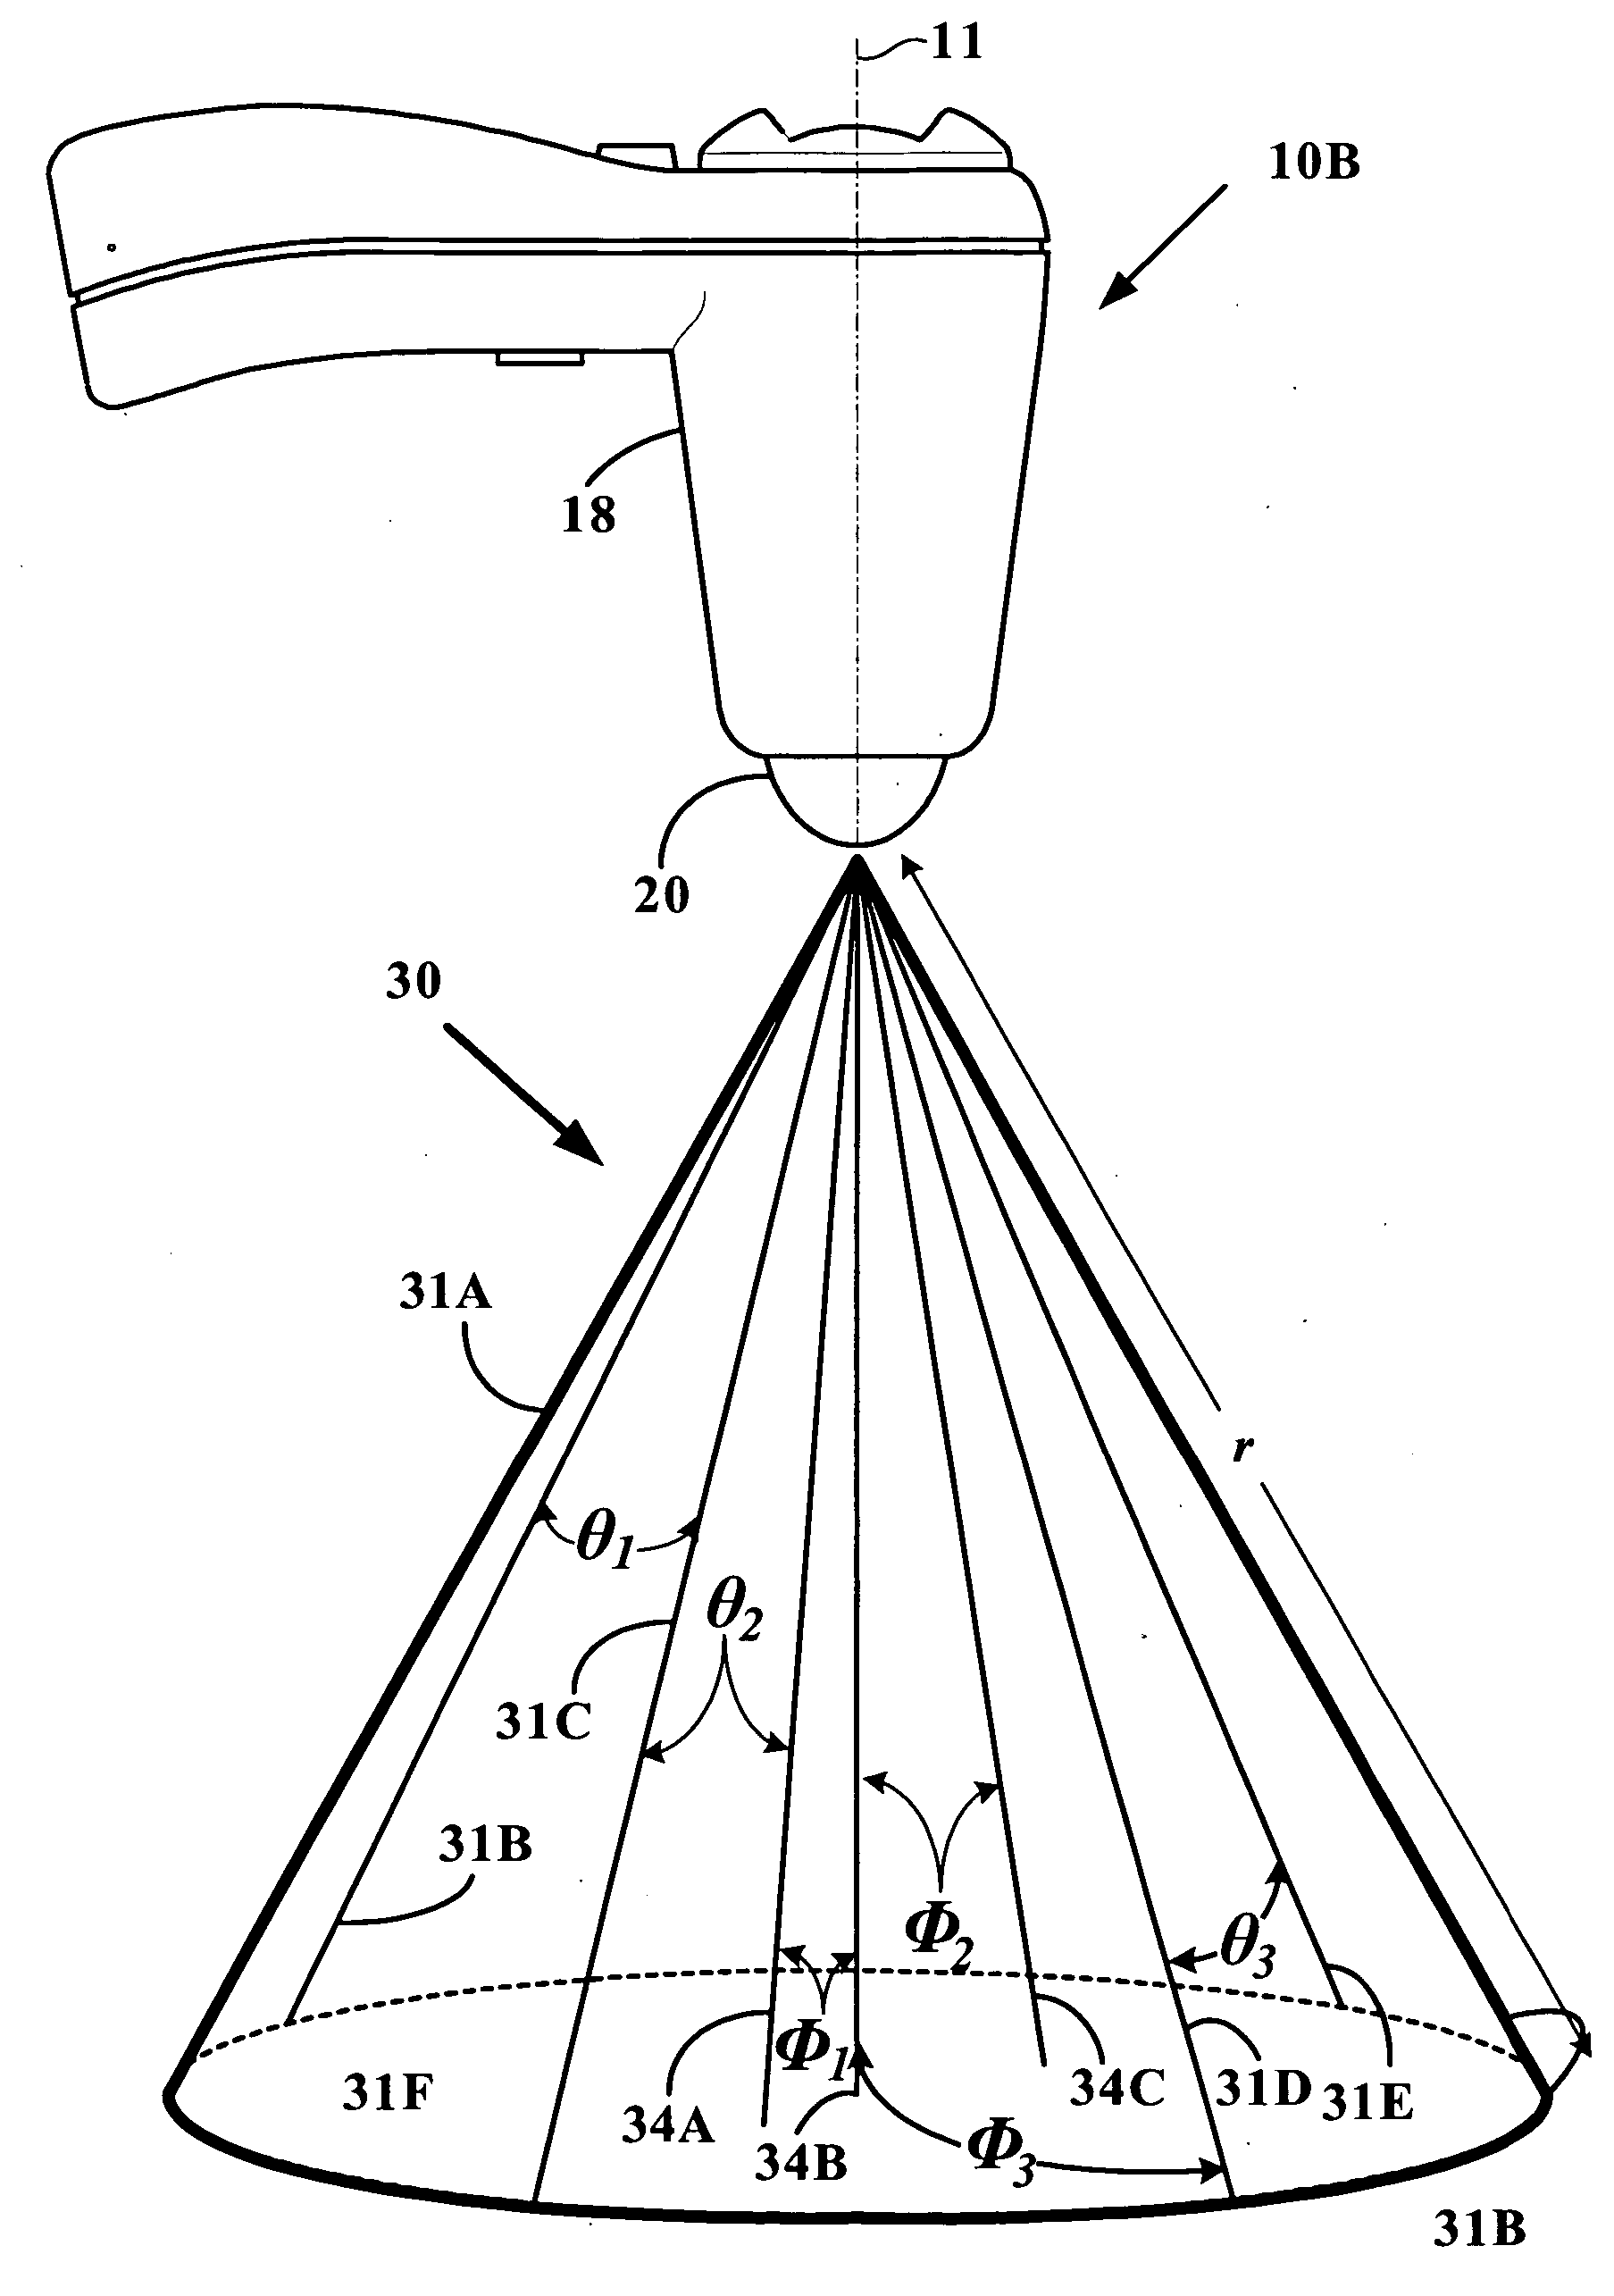 Systems and methods for determining organ wall mass by three-dimensional ultrasound